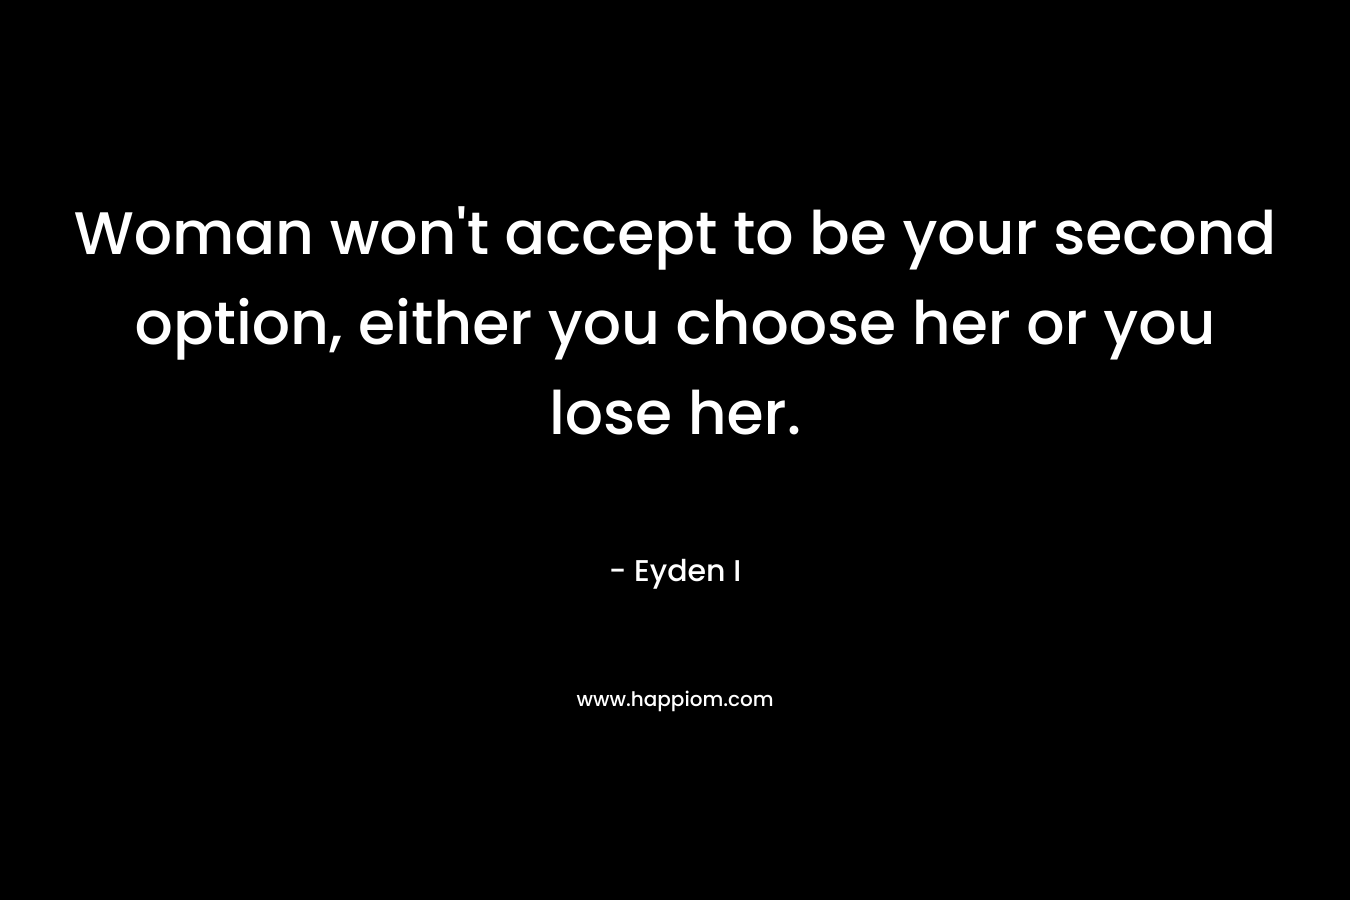 Woman won’t accept to be your second option, either you choose her or you lose her. – Eyden I